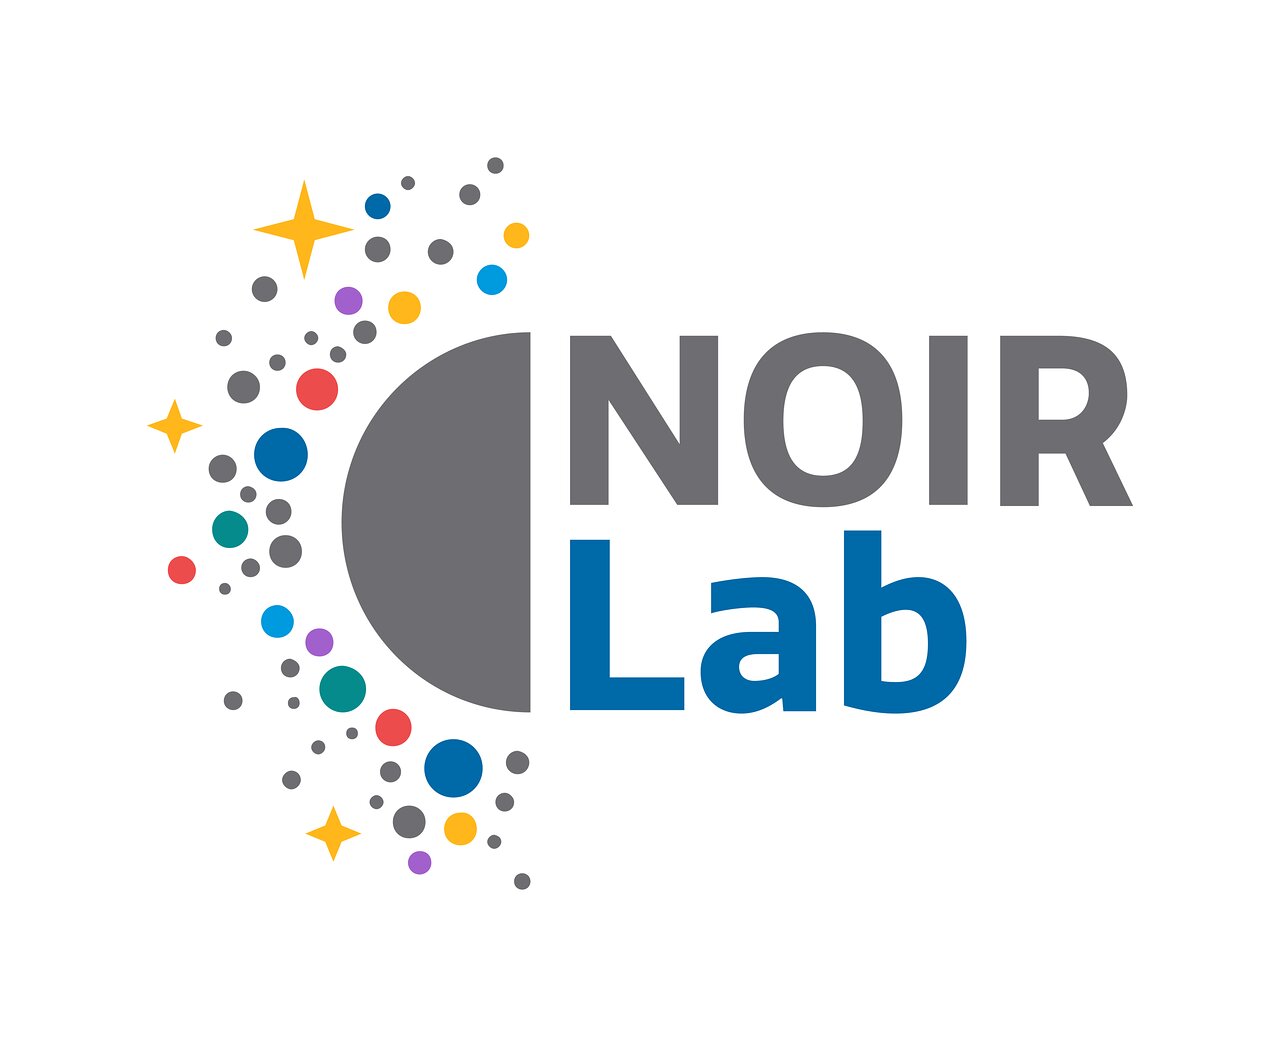 Telescope Operations Restored After Cybersecurity Incident at NSF’s NOIRLab